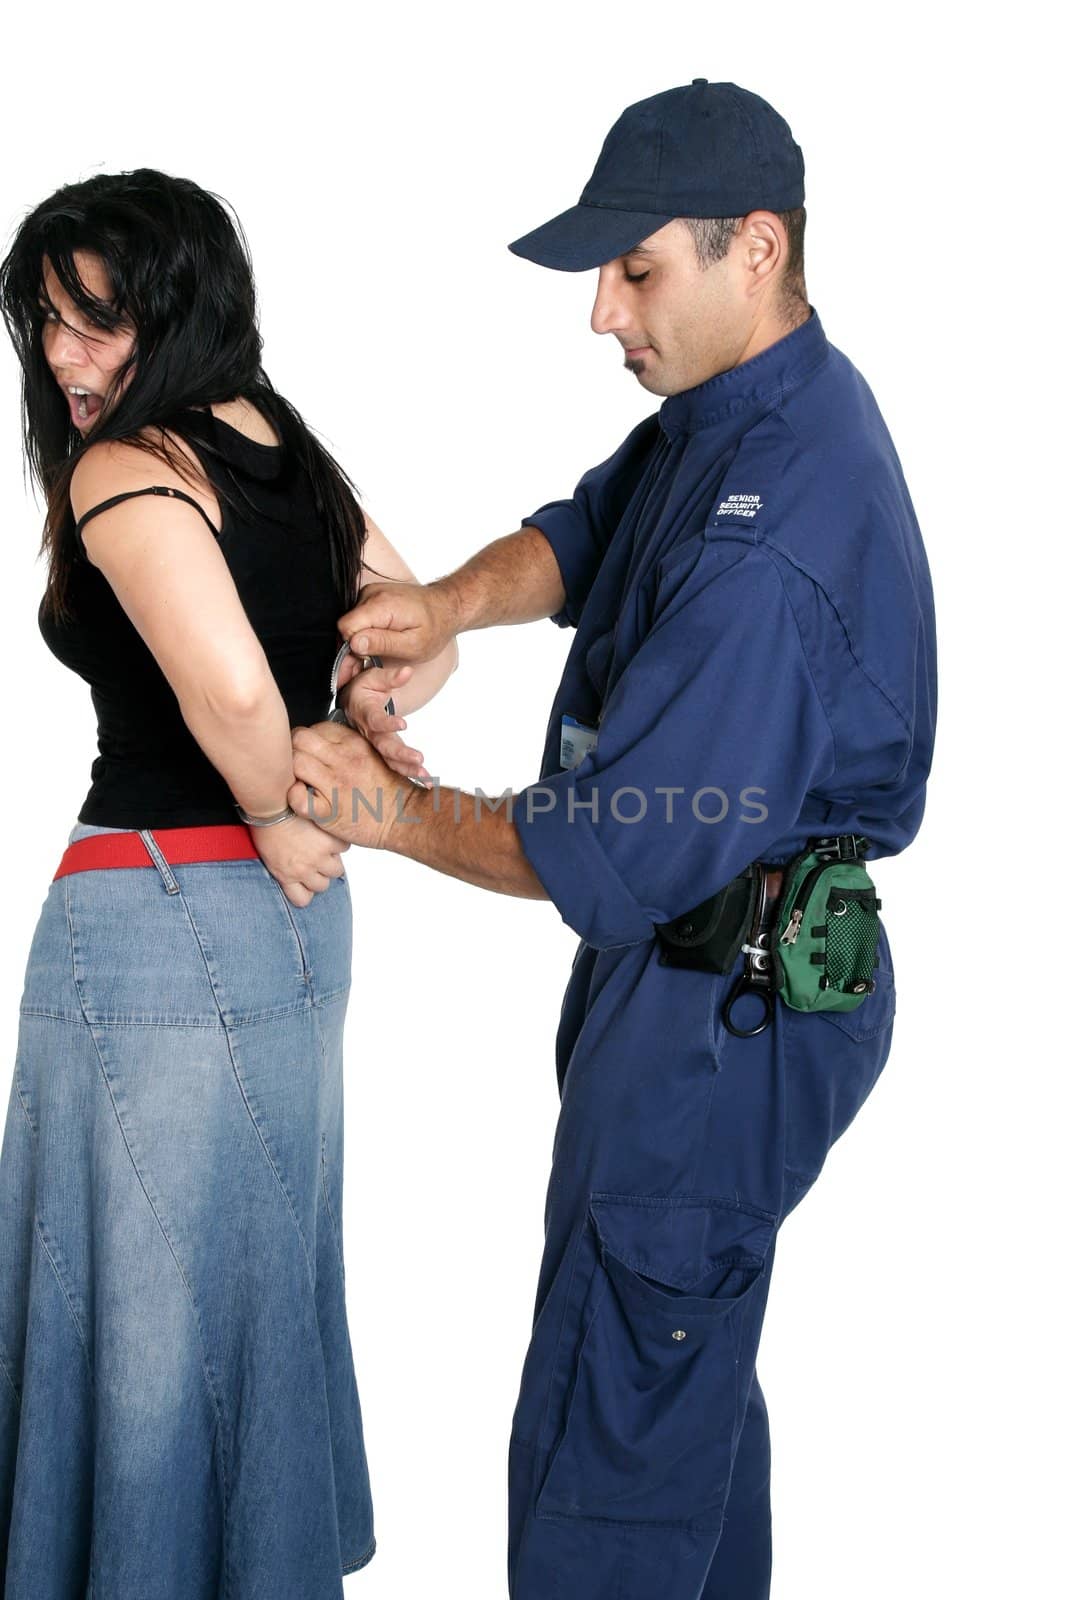 Suspect female being handcuffed by an officer